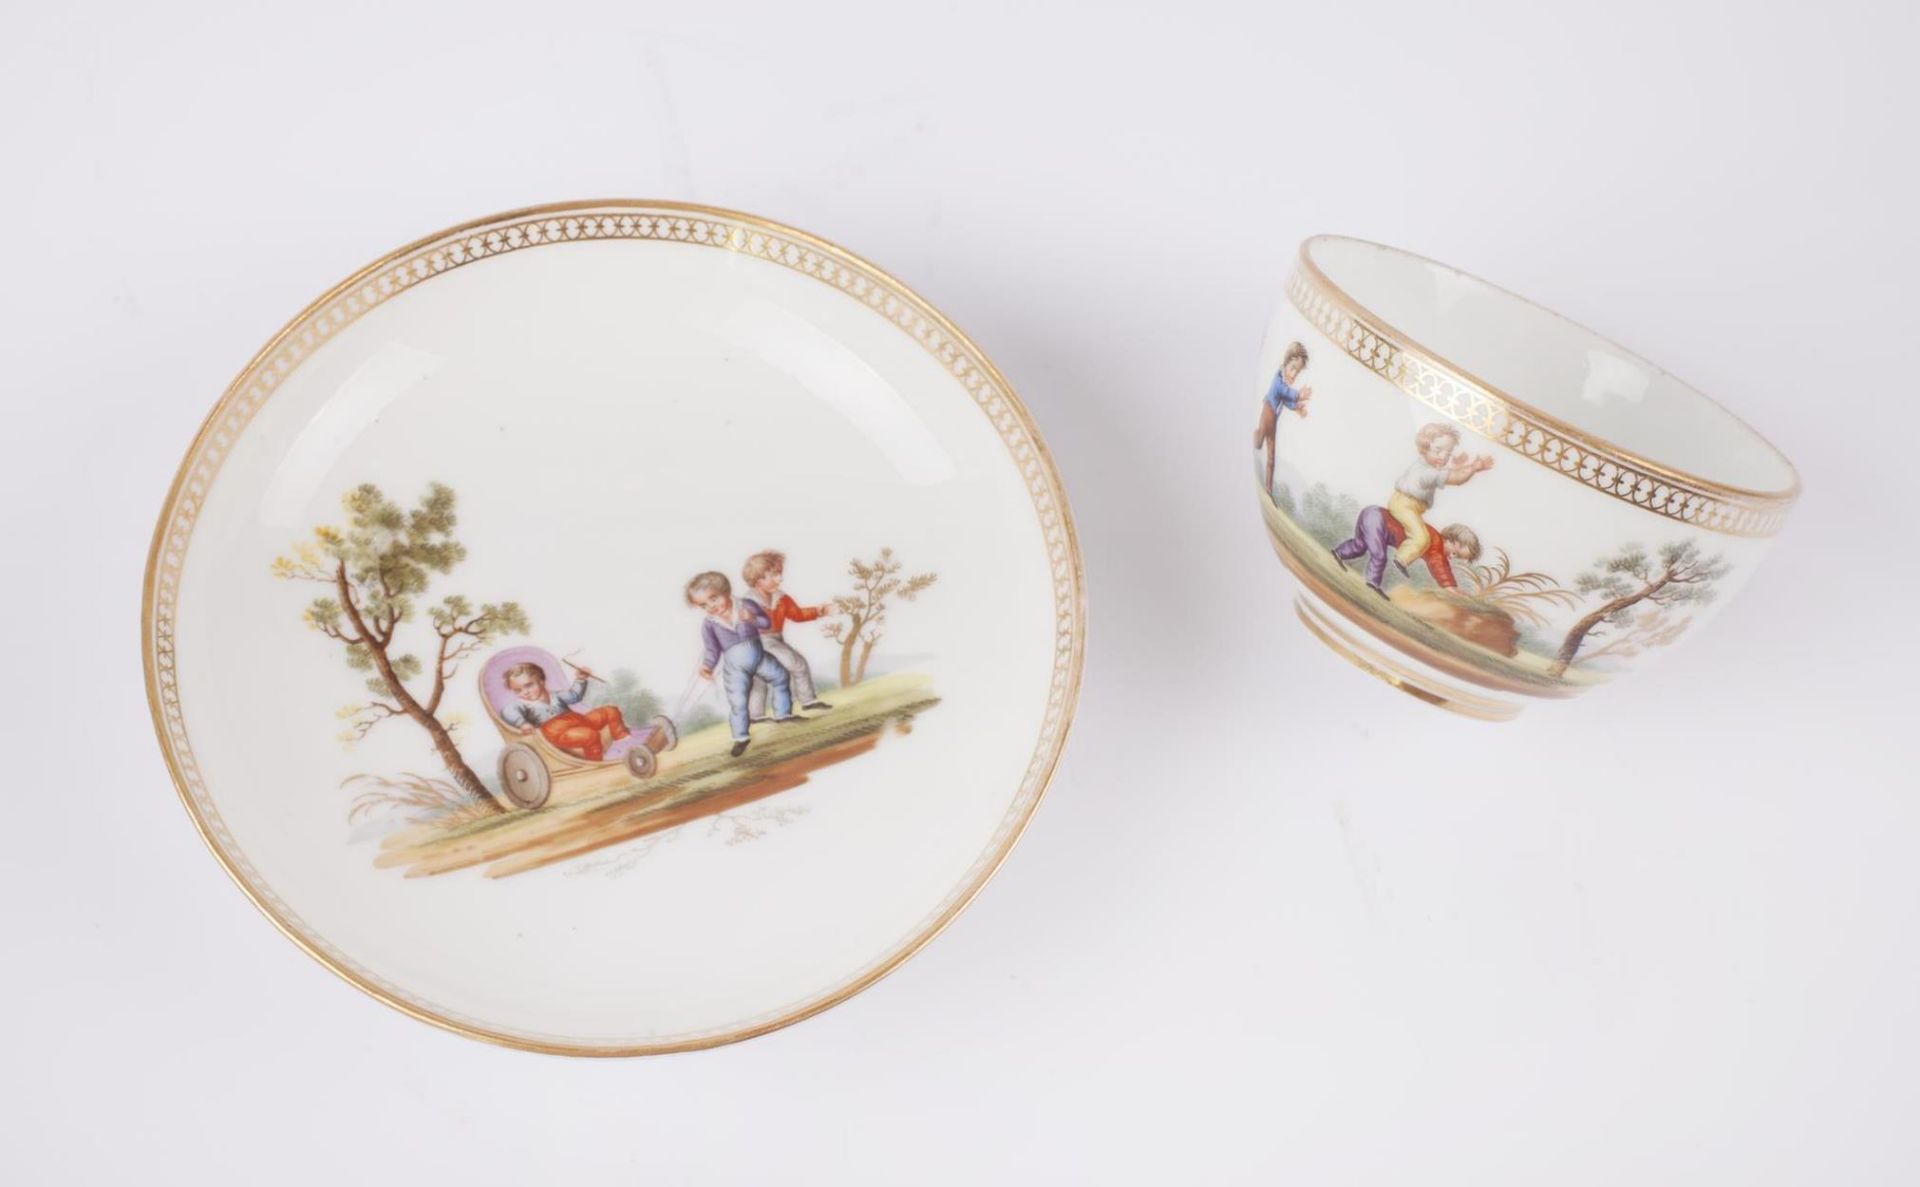 Two tea cup and saucer sets "A child's play". Popov. Moscow. 1850s. Porcelain, gilding, painting. - Bild 5 aus 8